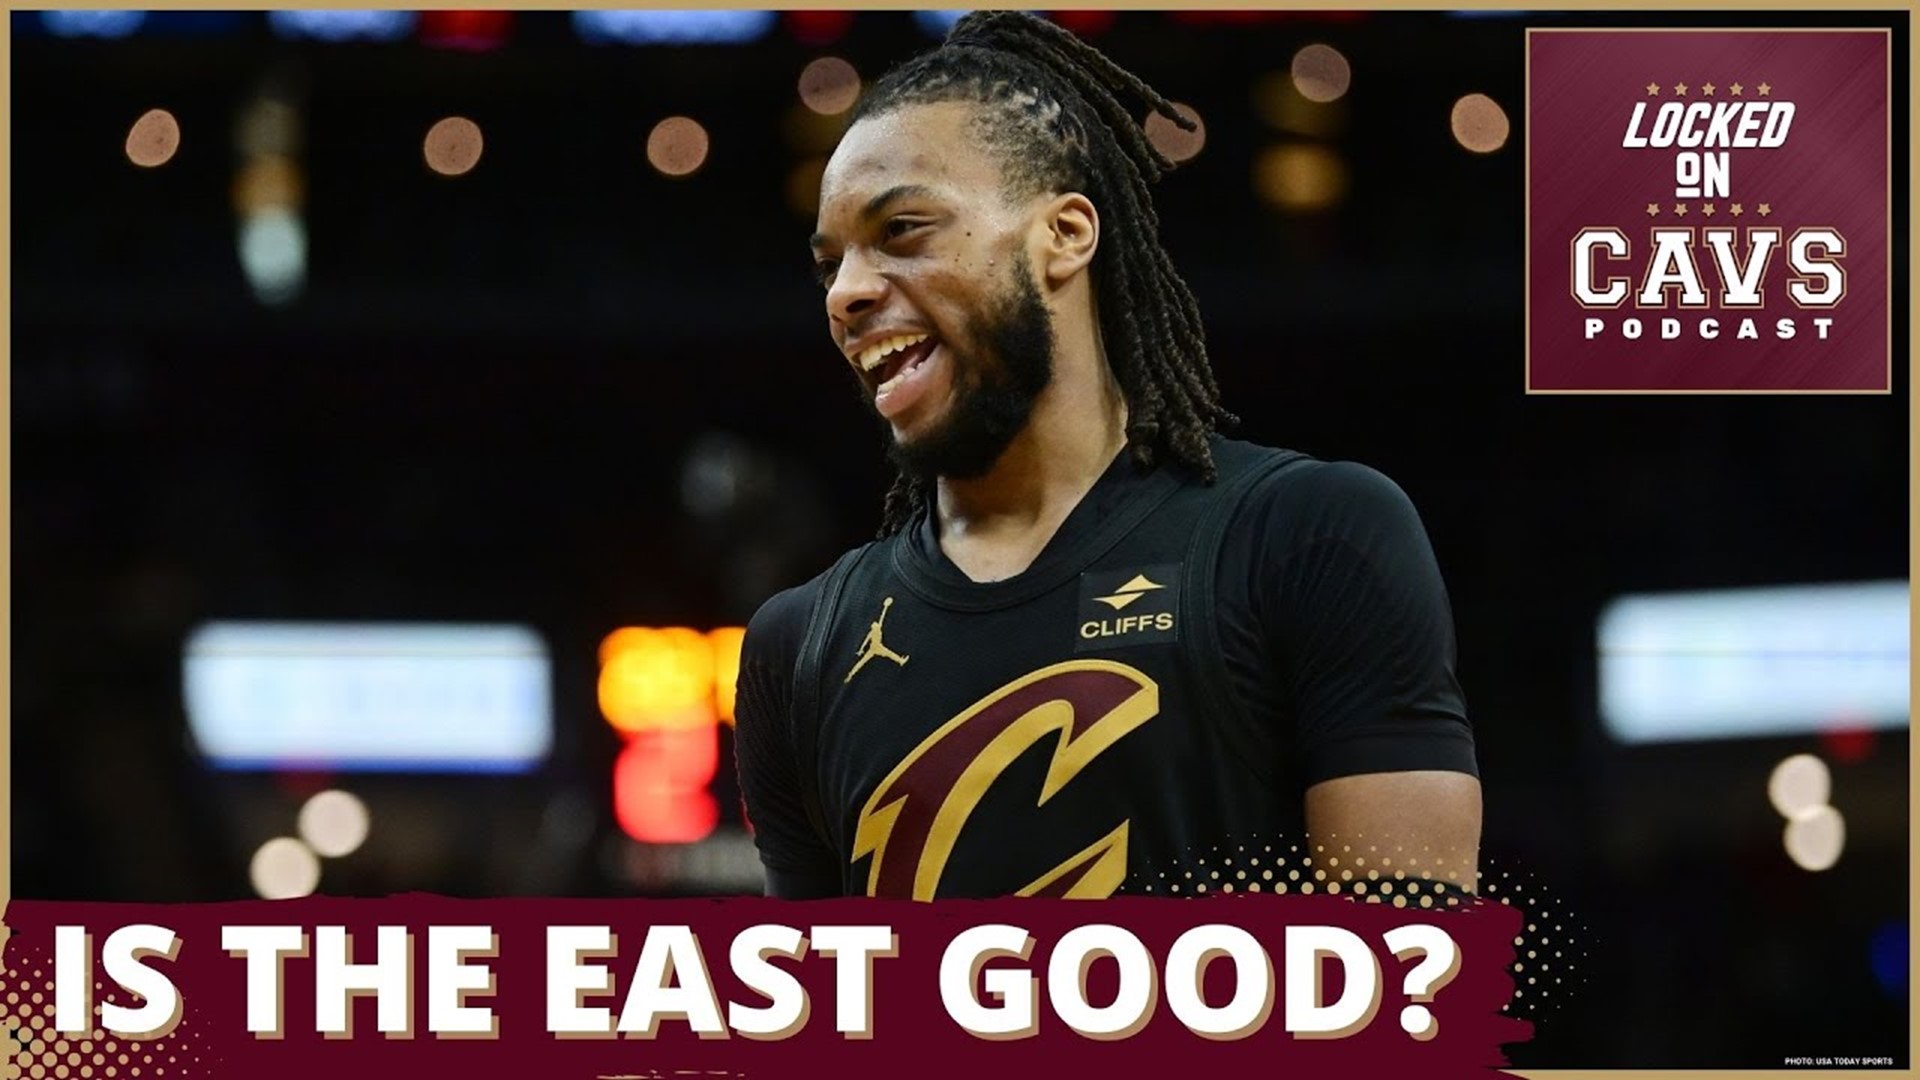 Friday’s Cavs-Pacers game, if any teams in the East aside from the Celtics are actually good, how the teams could match up in a playoff situation